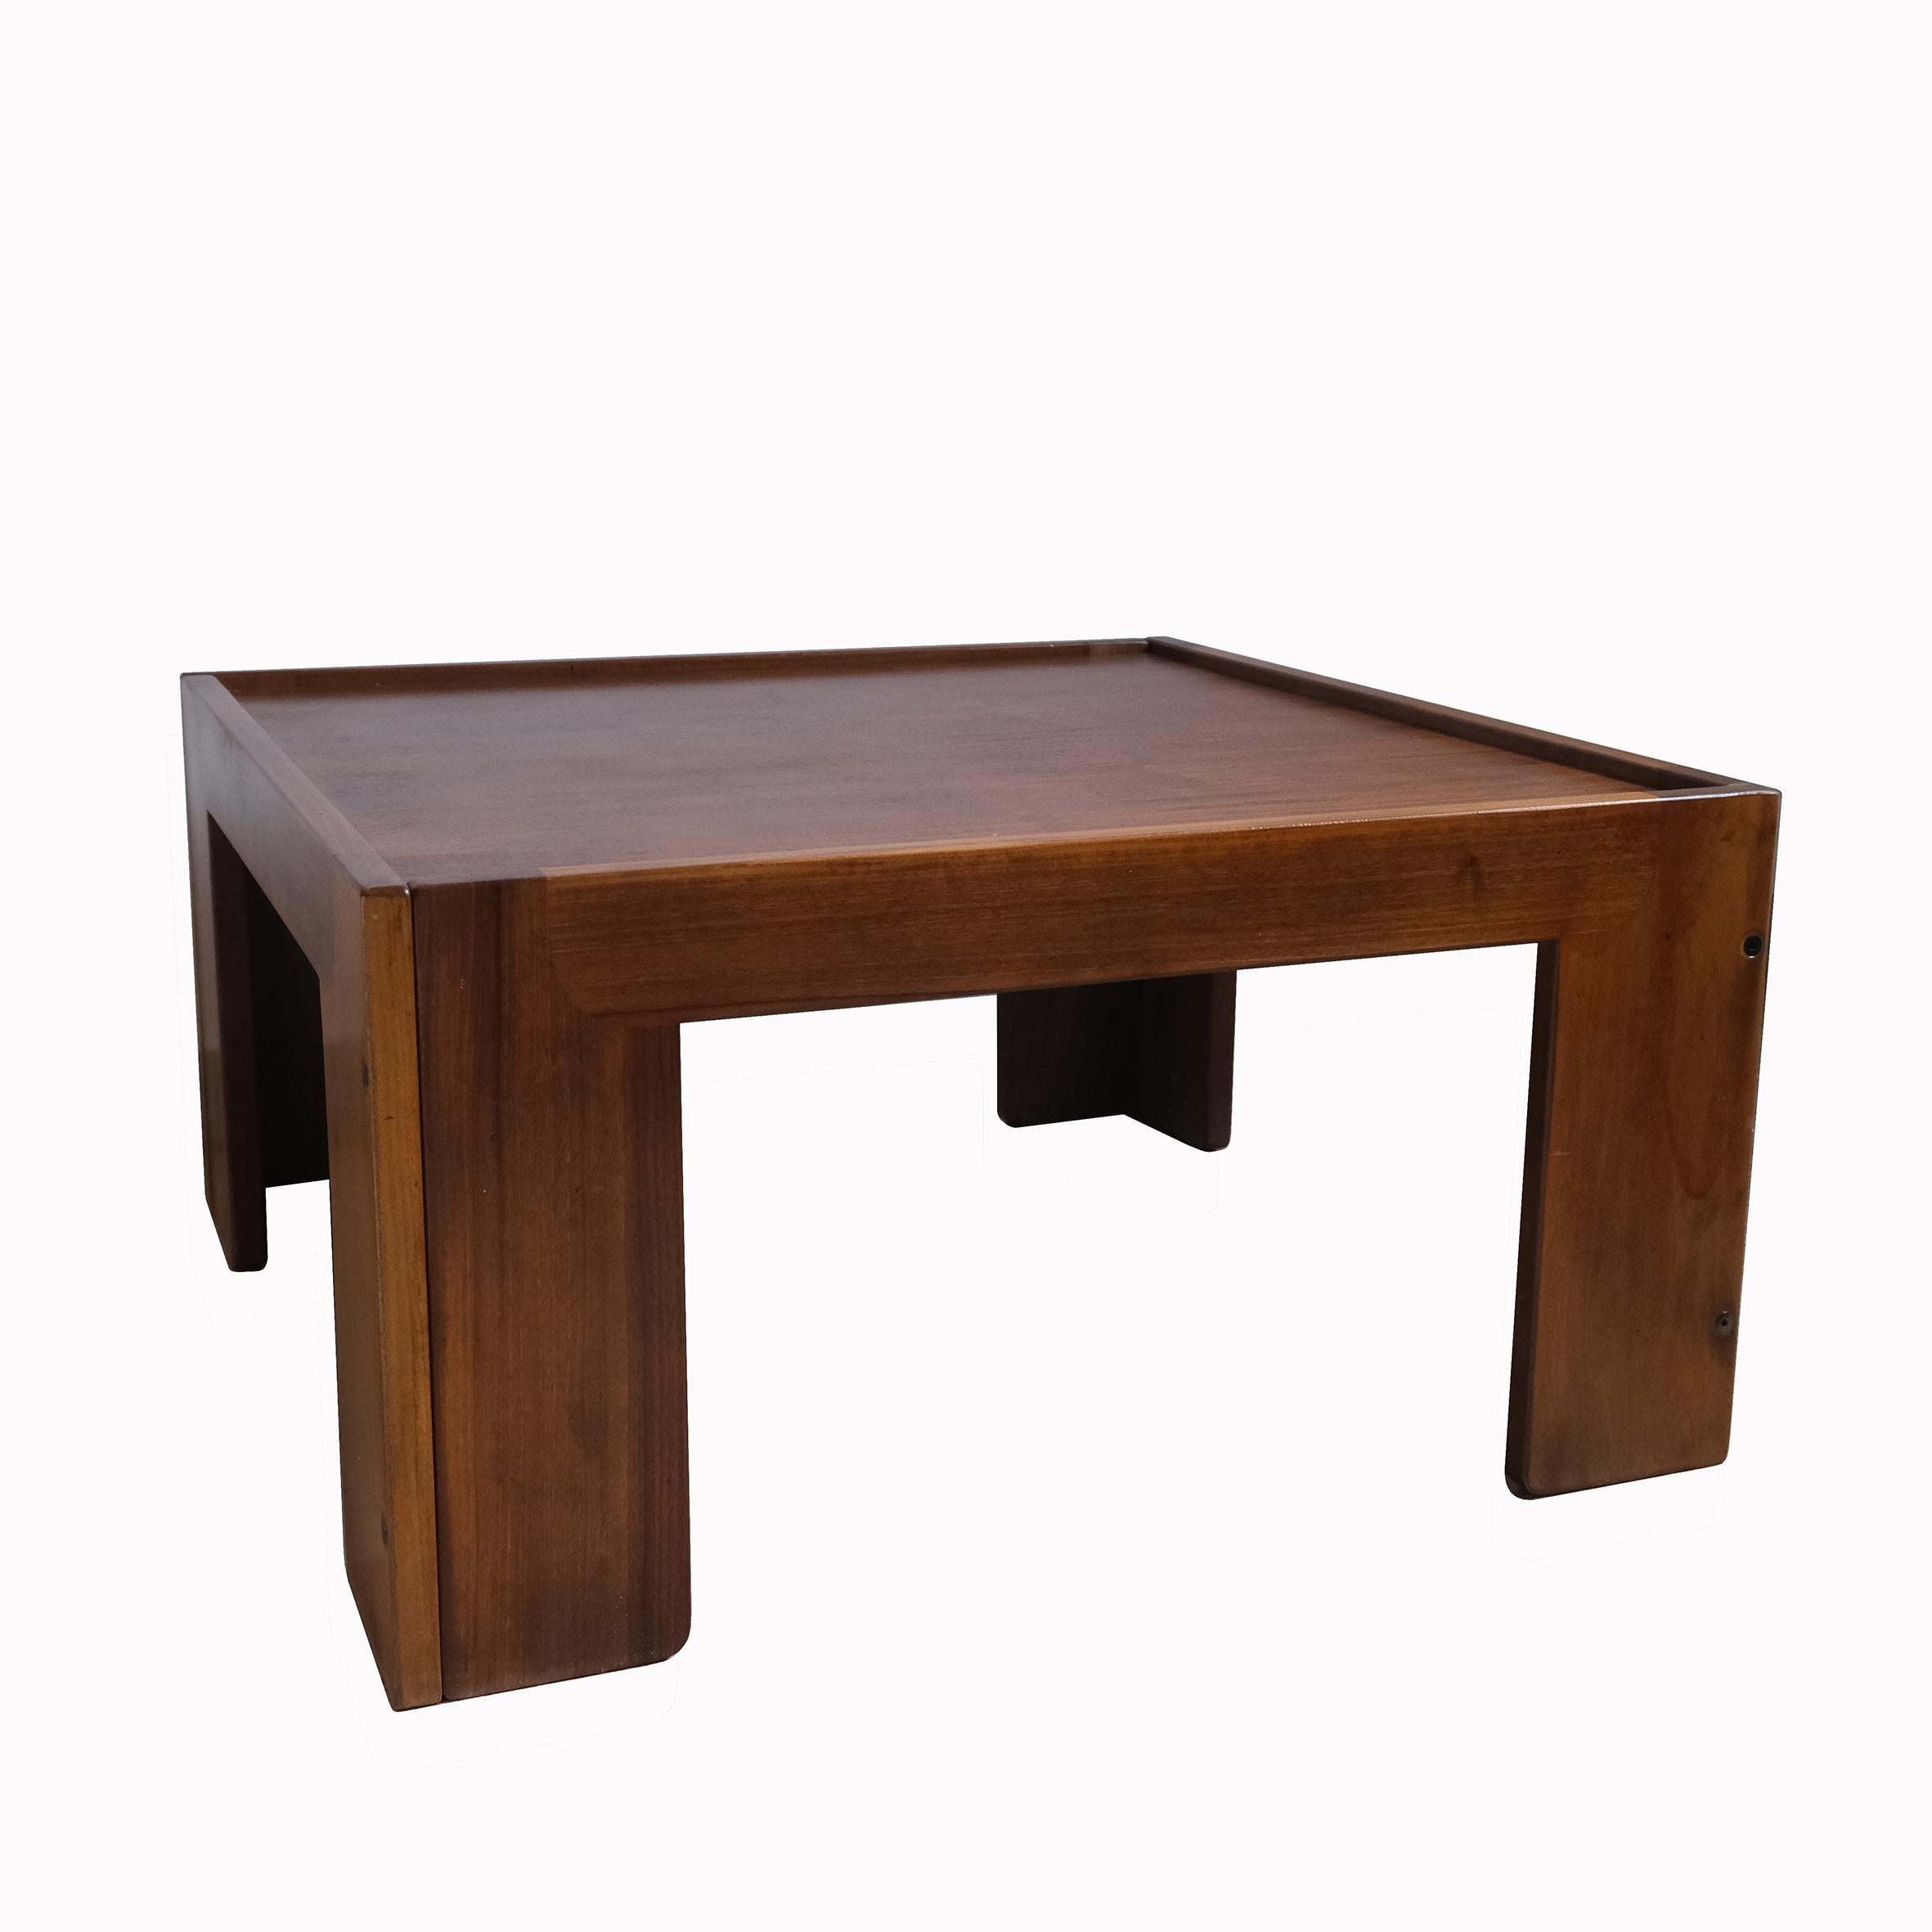 Italian Afra & Tobia Scarpa, A Low Table, Model 771, Cassina, 1960s For Sale